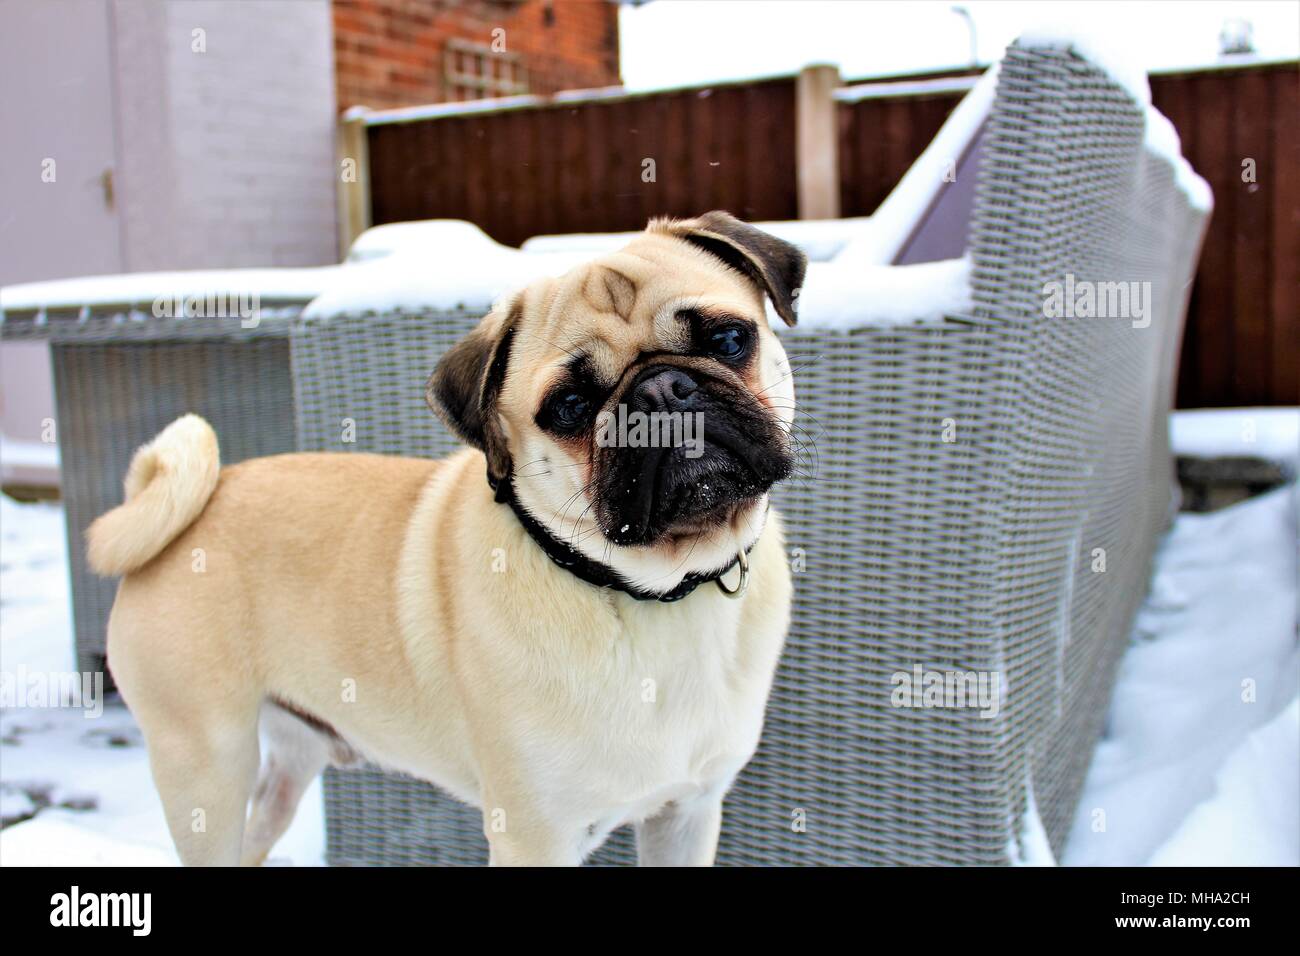 A young Pug dog standing in a snow covered garden. Stock Photo